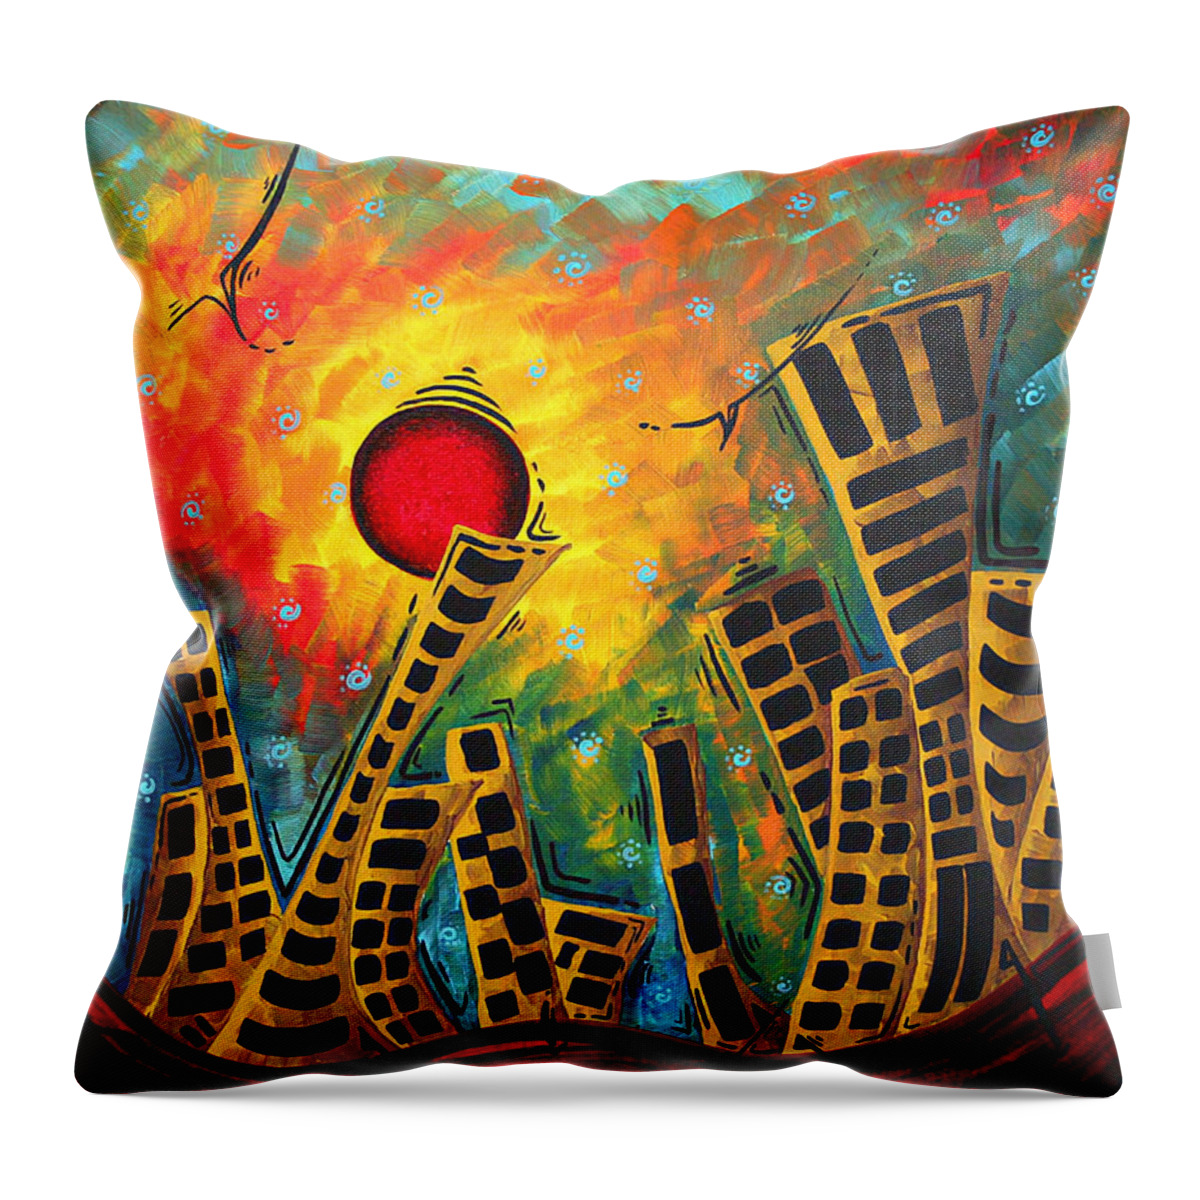 Original Throw Pillow featuring the painting Glimmer of Hope by MADART by Megan Aroon